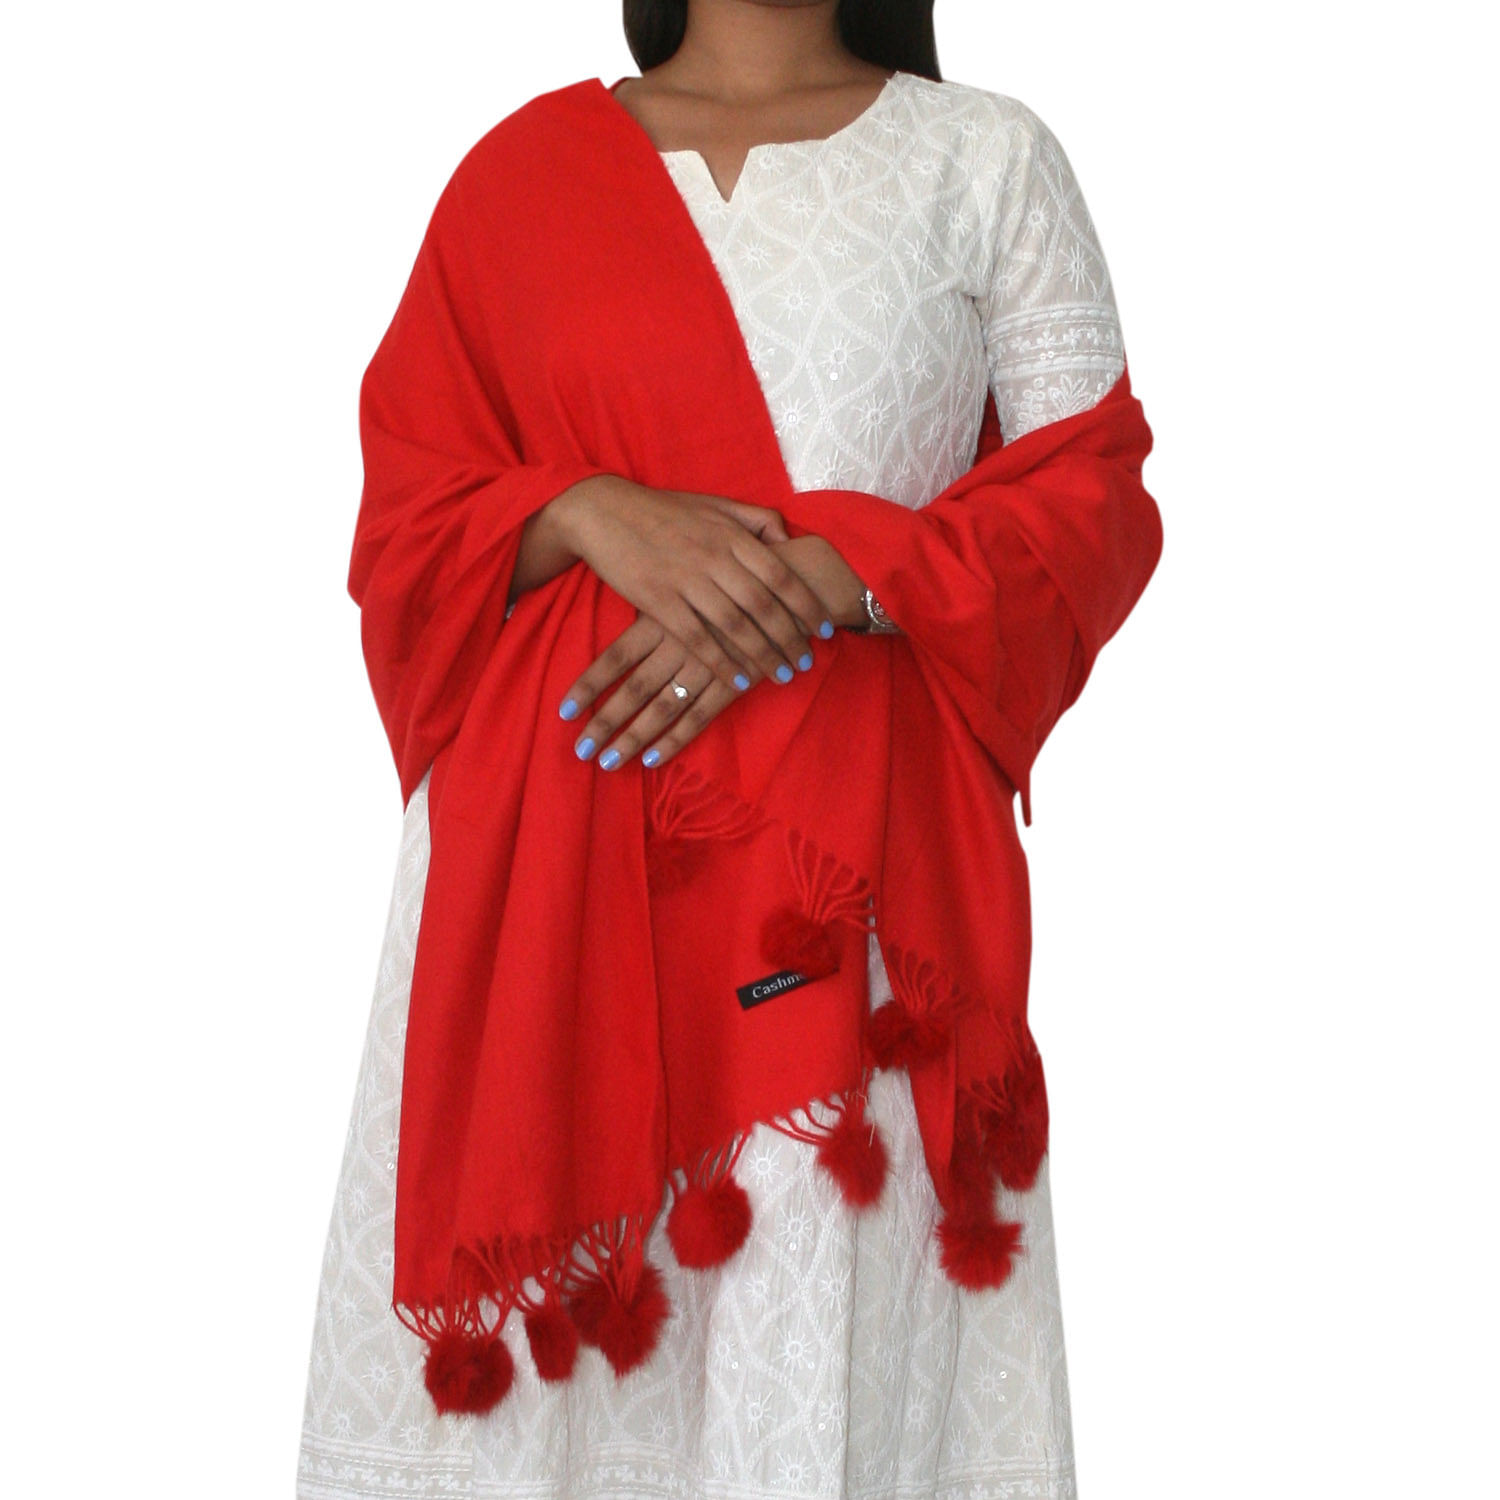 WMN-STOLE-WN-ETH-38, RED